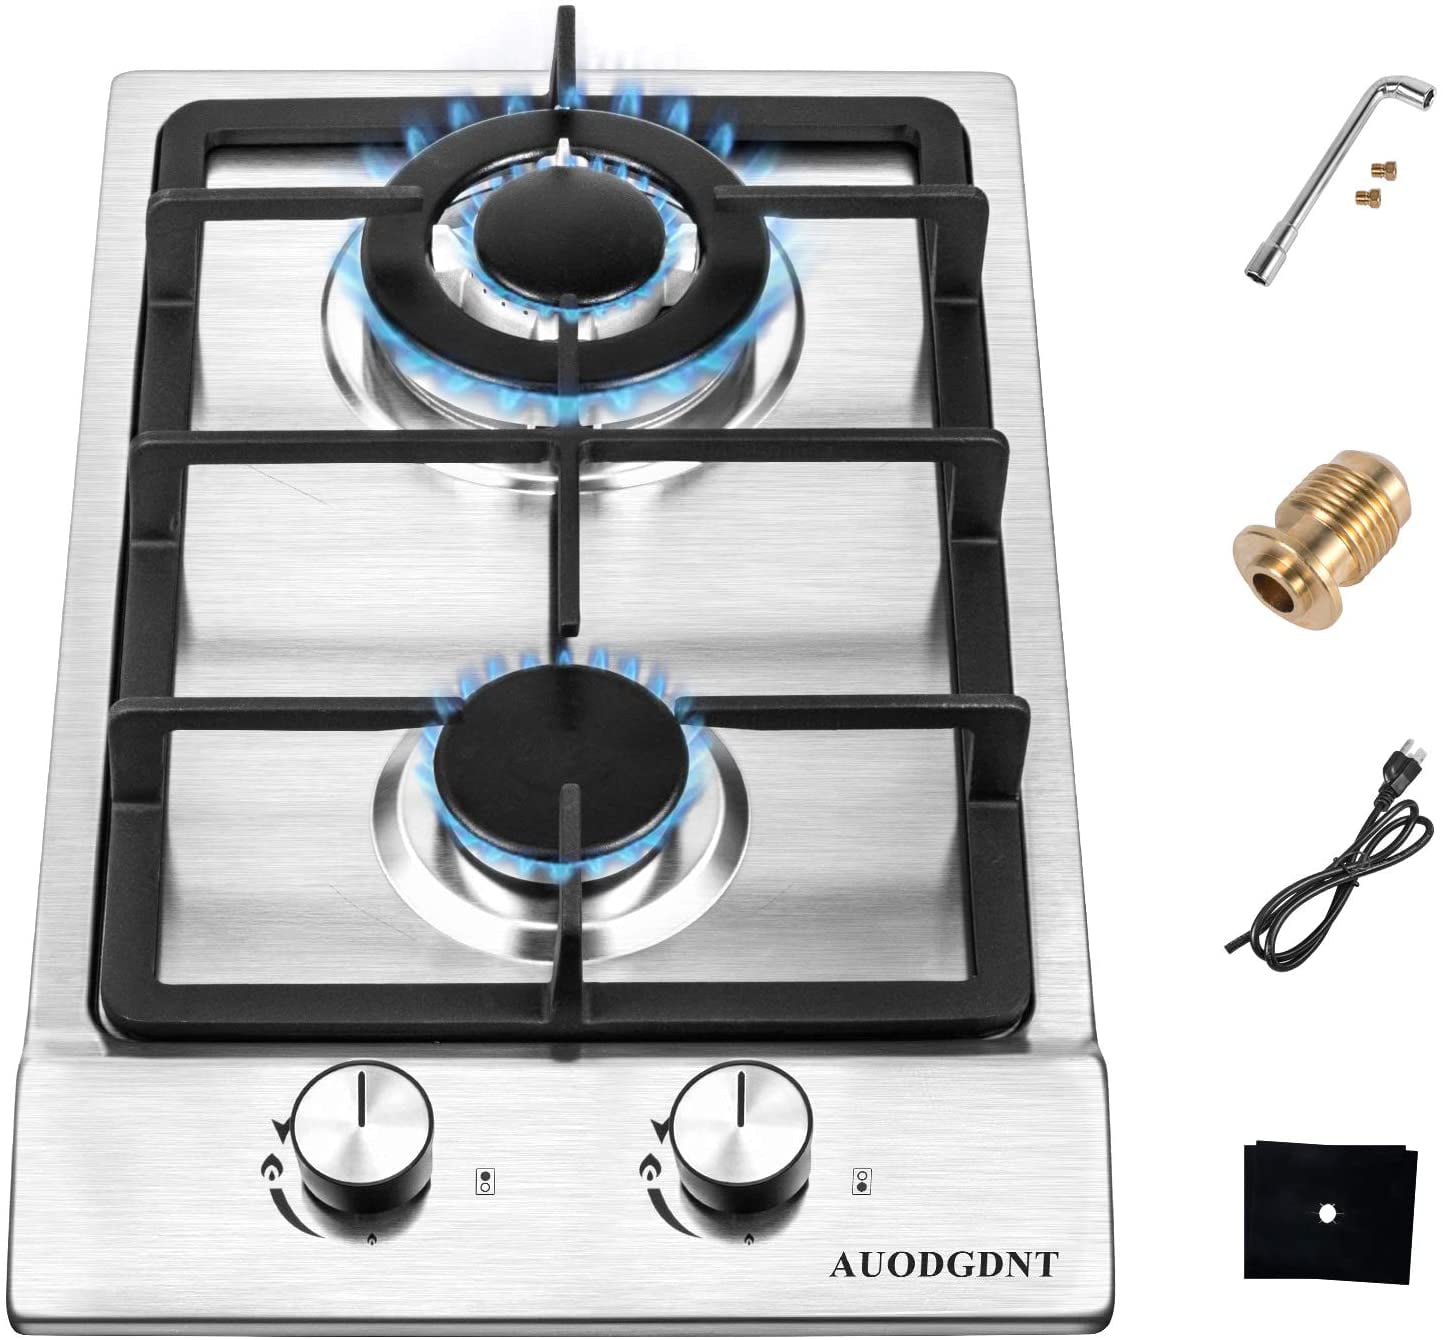 12 Inches Gas Stove High Gas Cooktop Gas Hob Stove Top 2 Burners Gas Range Double Burner Gas Stoves Kitchen Slope Edge Tempered Glass LPG/NG Dual Fuel Electric Stove Top Thermocouple Protection 